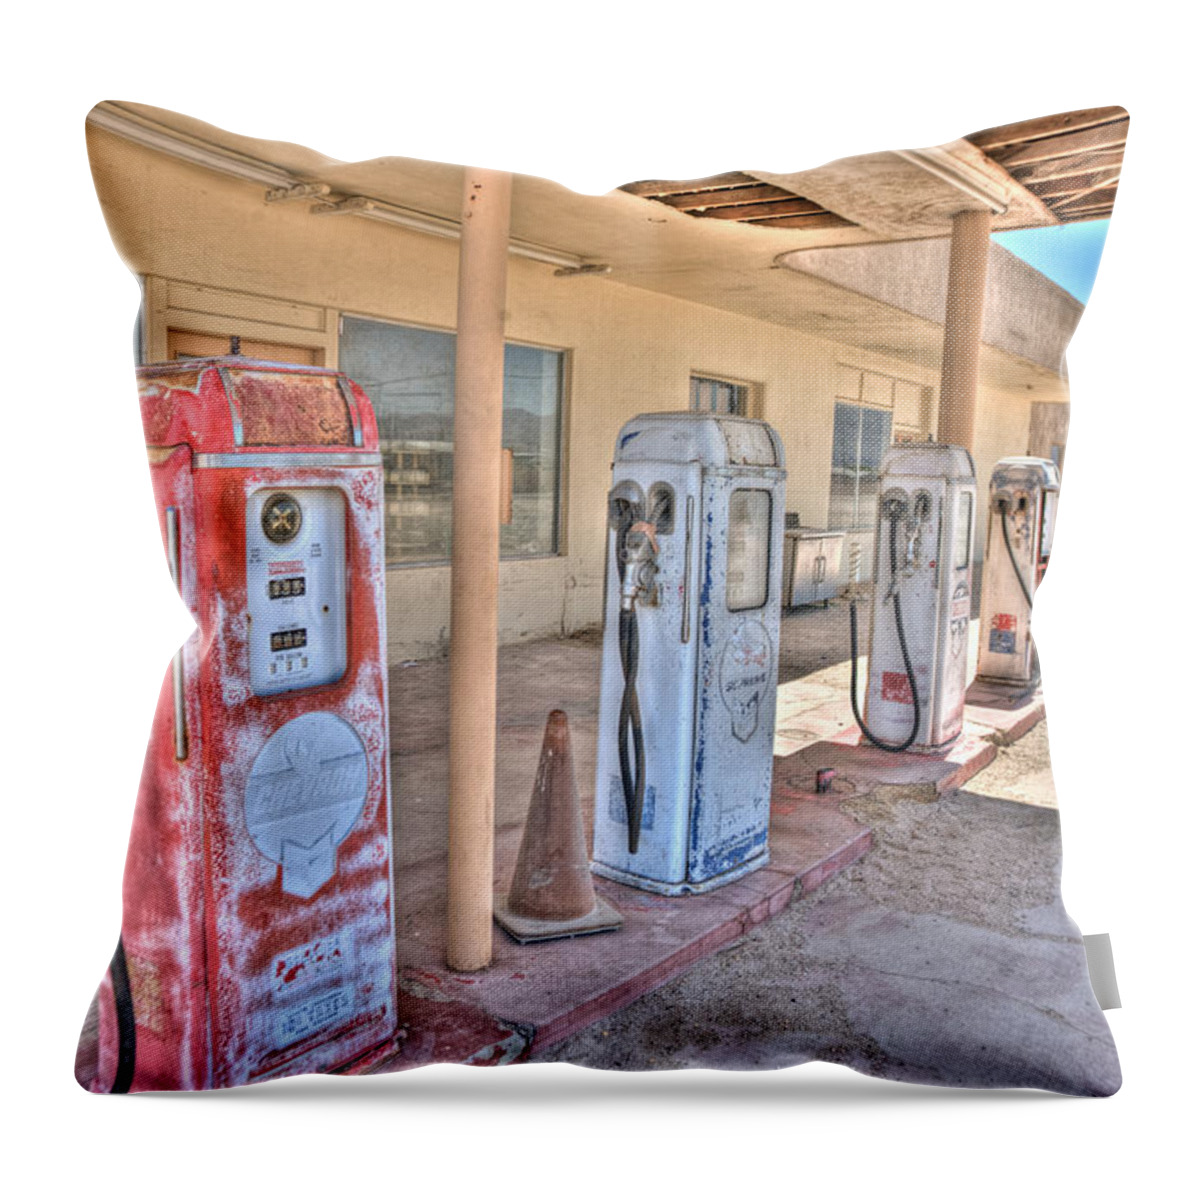 Gas Pumps Throw Pillow featuring the photograph Gas Pumps by Matthew Bamberg